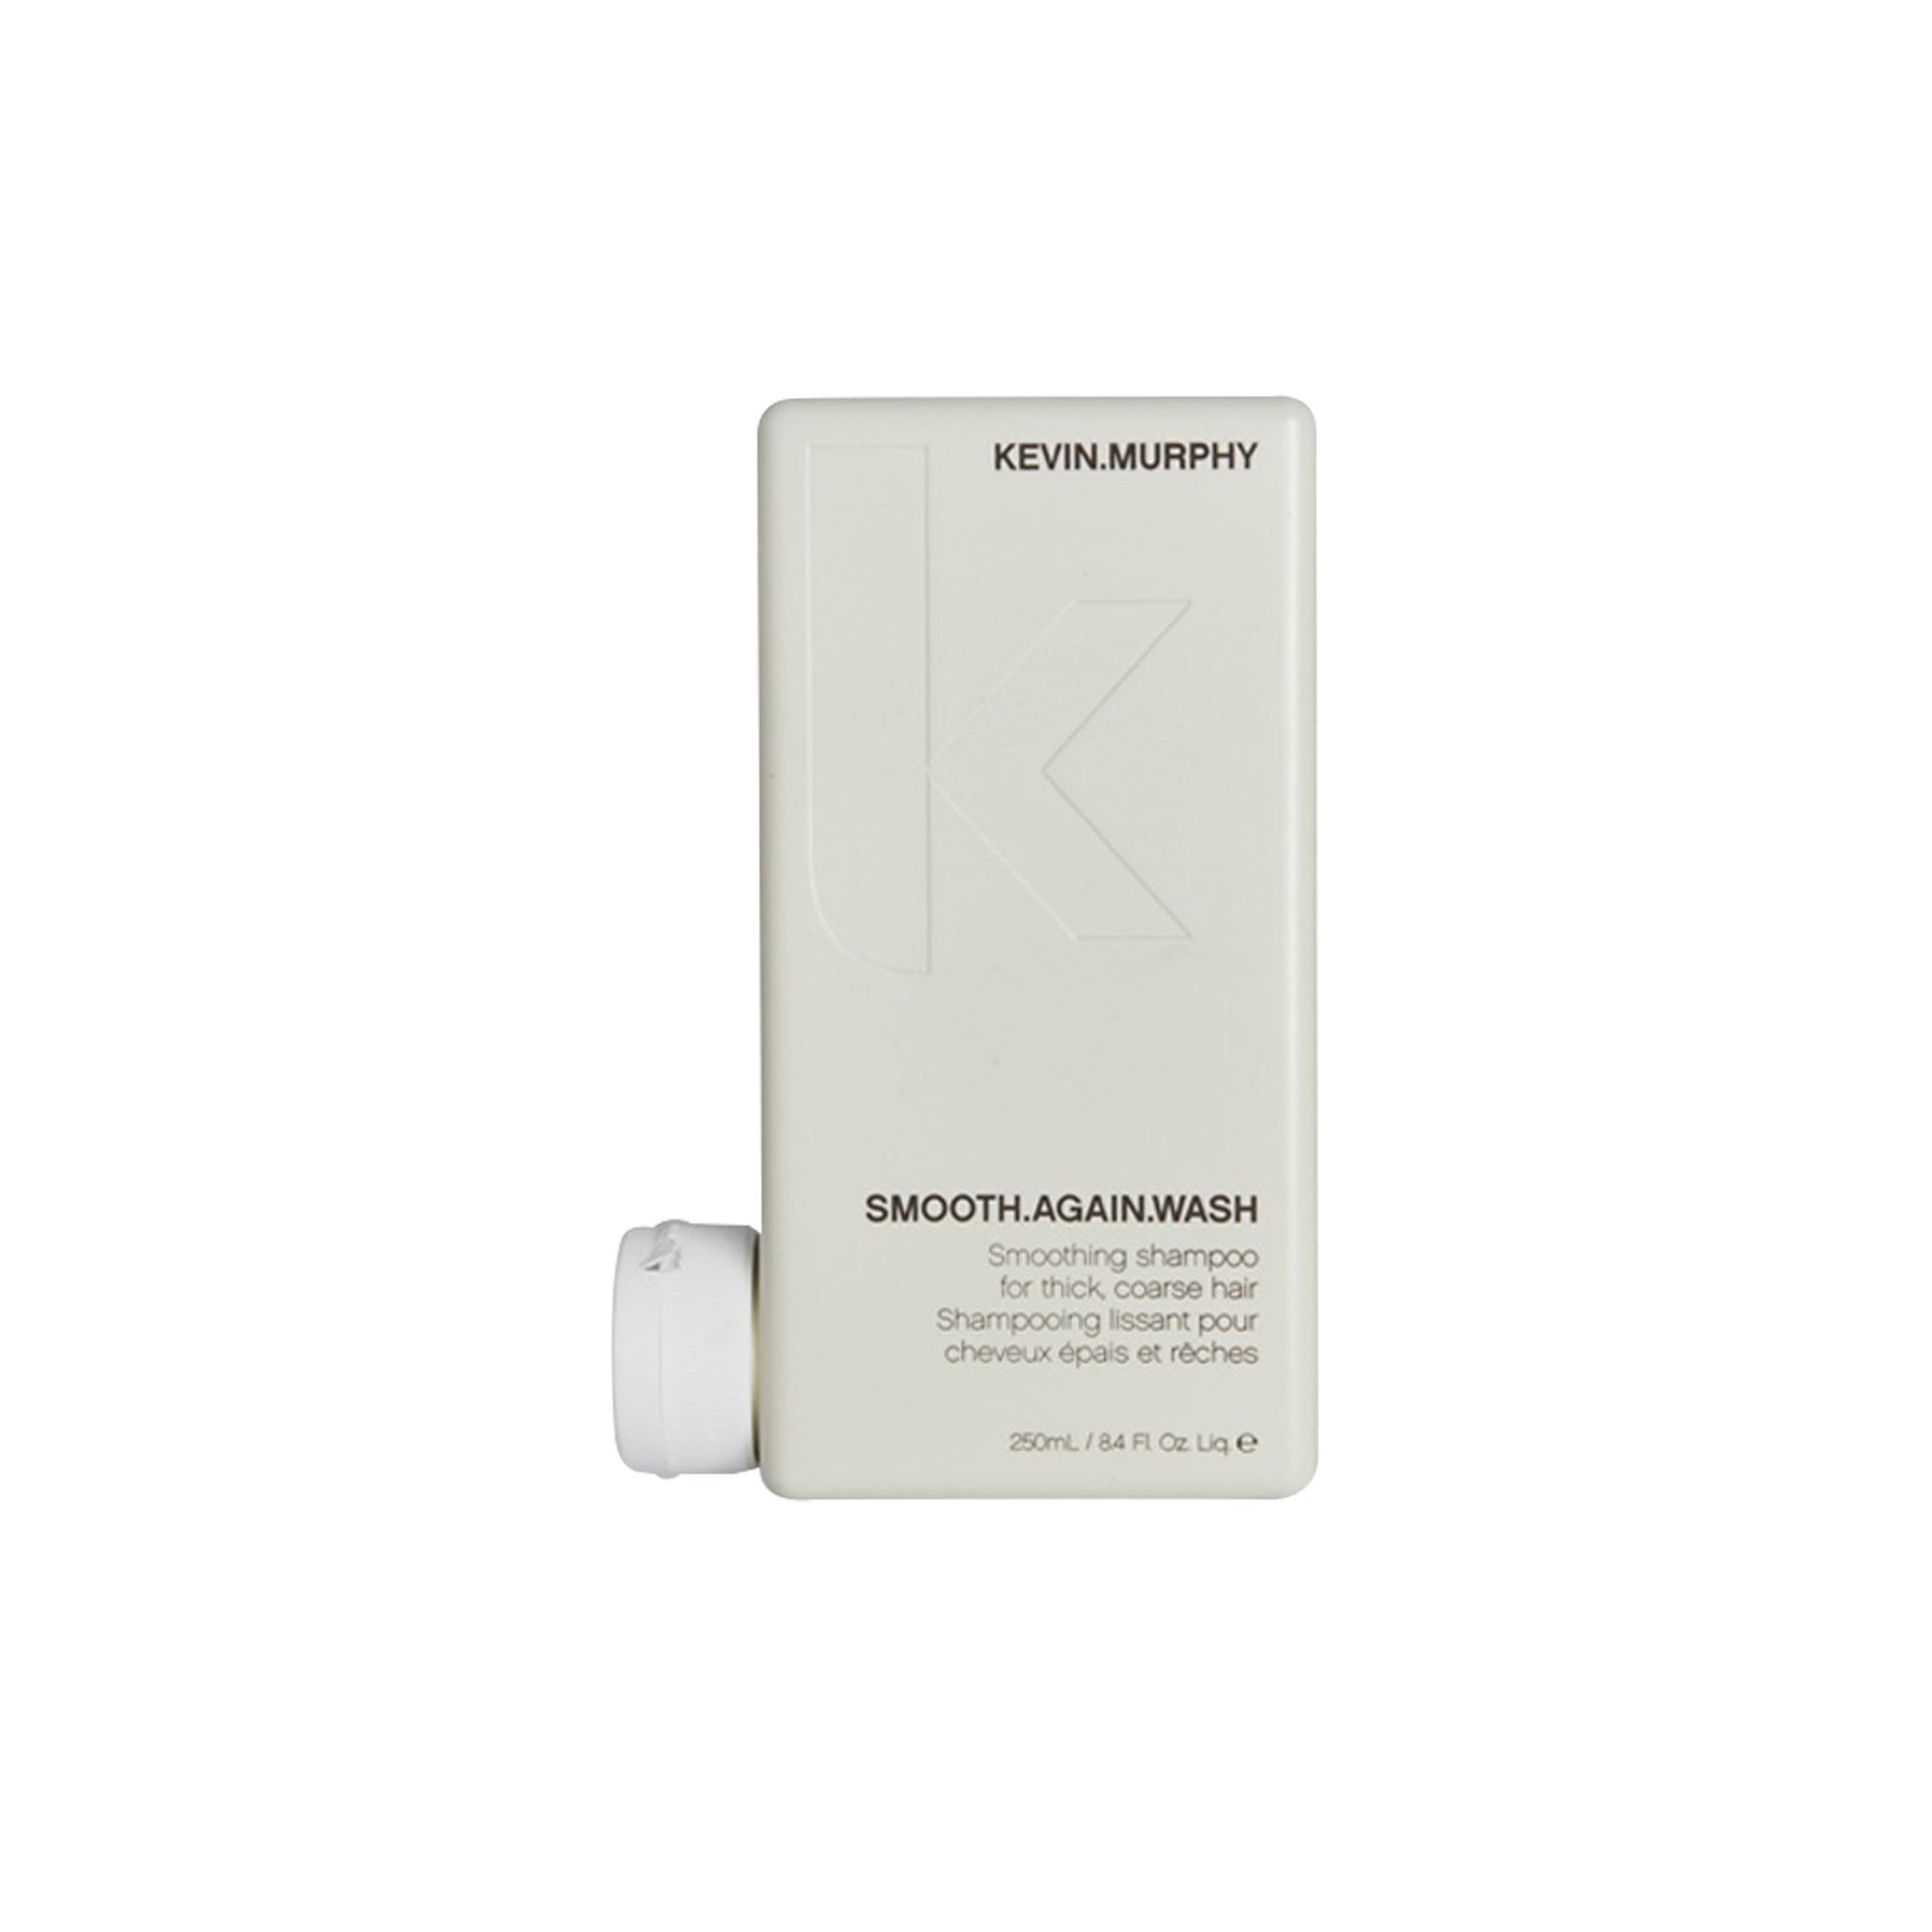 Kevin Murphy SMOOTH.AGAIN.WASH 250ml